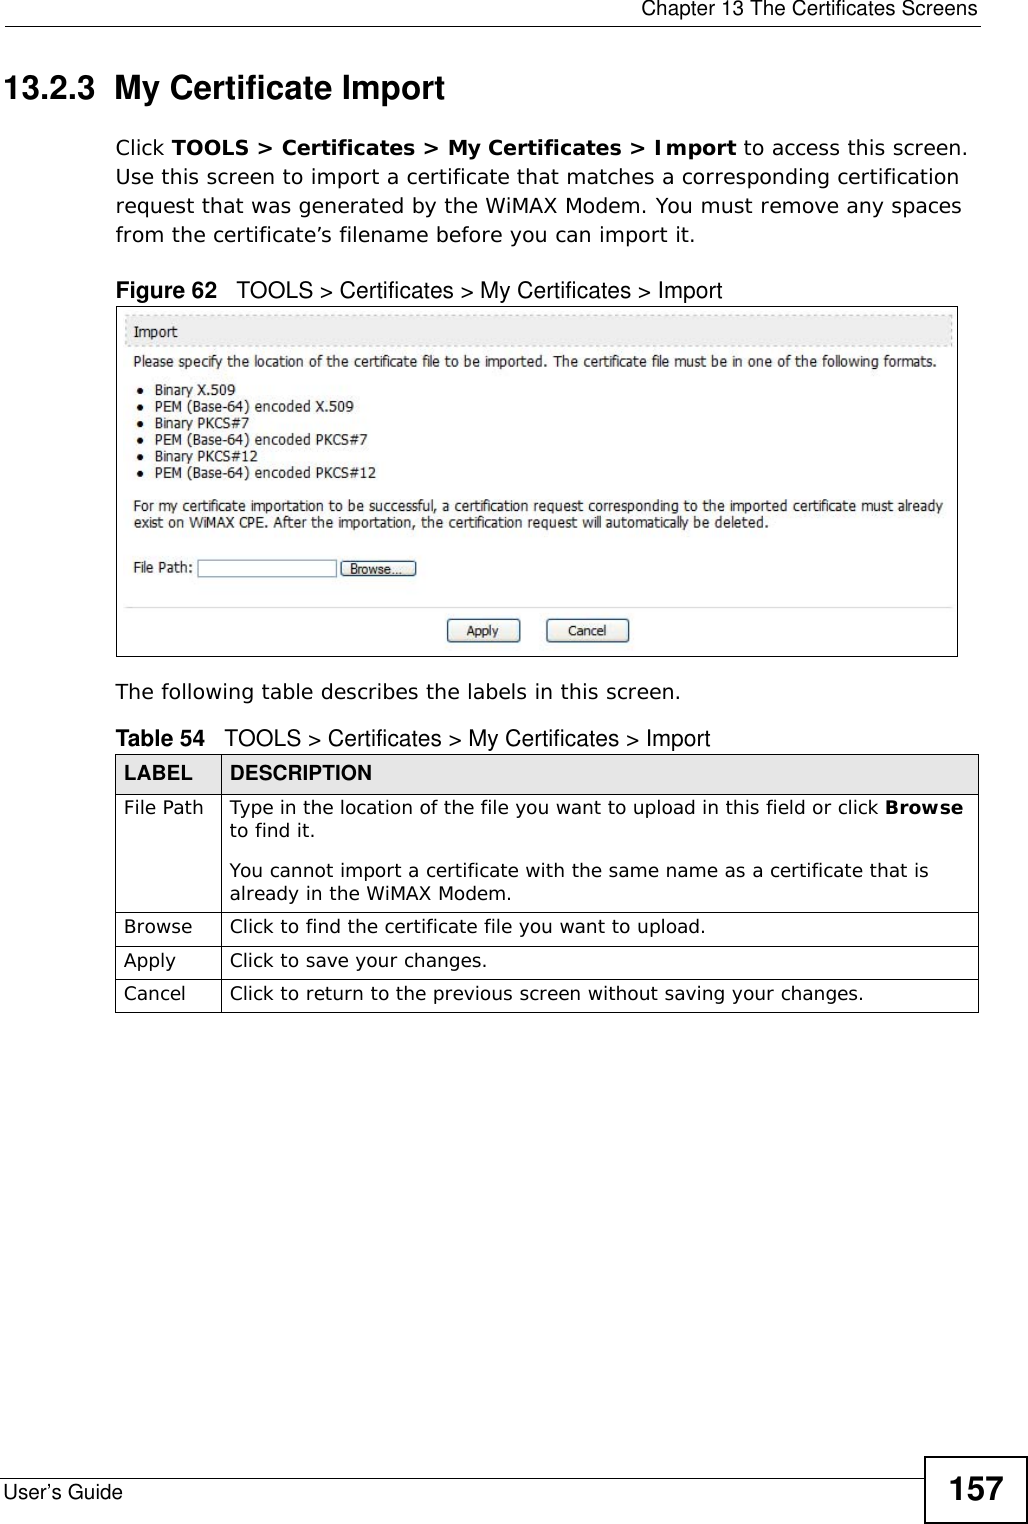  Chapter 13 The Certificates ScreensUser’s Guide 15713.2.3  My Certificate Import  Click TOOLS &gt; Certificates &gt; My Certificates &gt; Import to access this screen. Use this screen to import a certificate that matches a corresponding certification request that was generated by the WiMAX Modem. You must remove any spaces from the certificate’s filename before you can import it.Figure 62   TOOLS &gt; Certificates &gt; My Certificates &gt; ImportThe following table describes the labels in this screen.  Table 54   TOOLS &gt; Certificates &gt; My Certificates &gt; ImportLABEL DESCRIPTIONFile Path  Type in the location of the file you want to upload in this field or click Browse to find it.You cannot import a certificate with the same name as a certificate that is already in the WiMAX Modem.Browse  Click to find the certificate file you want to upload. Apply Click to save your changes.Cancel Click to return to the previous screen without saving your changes.